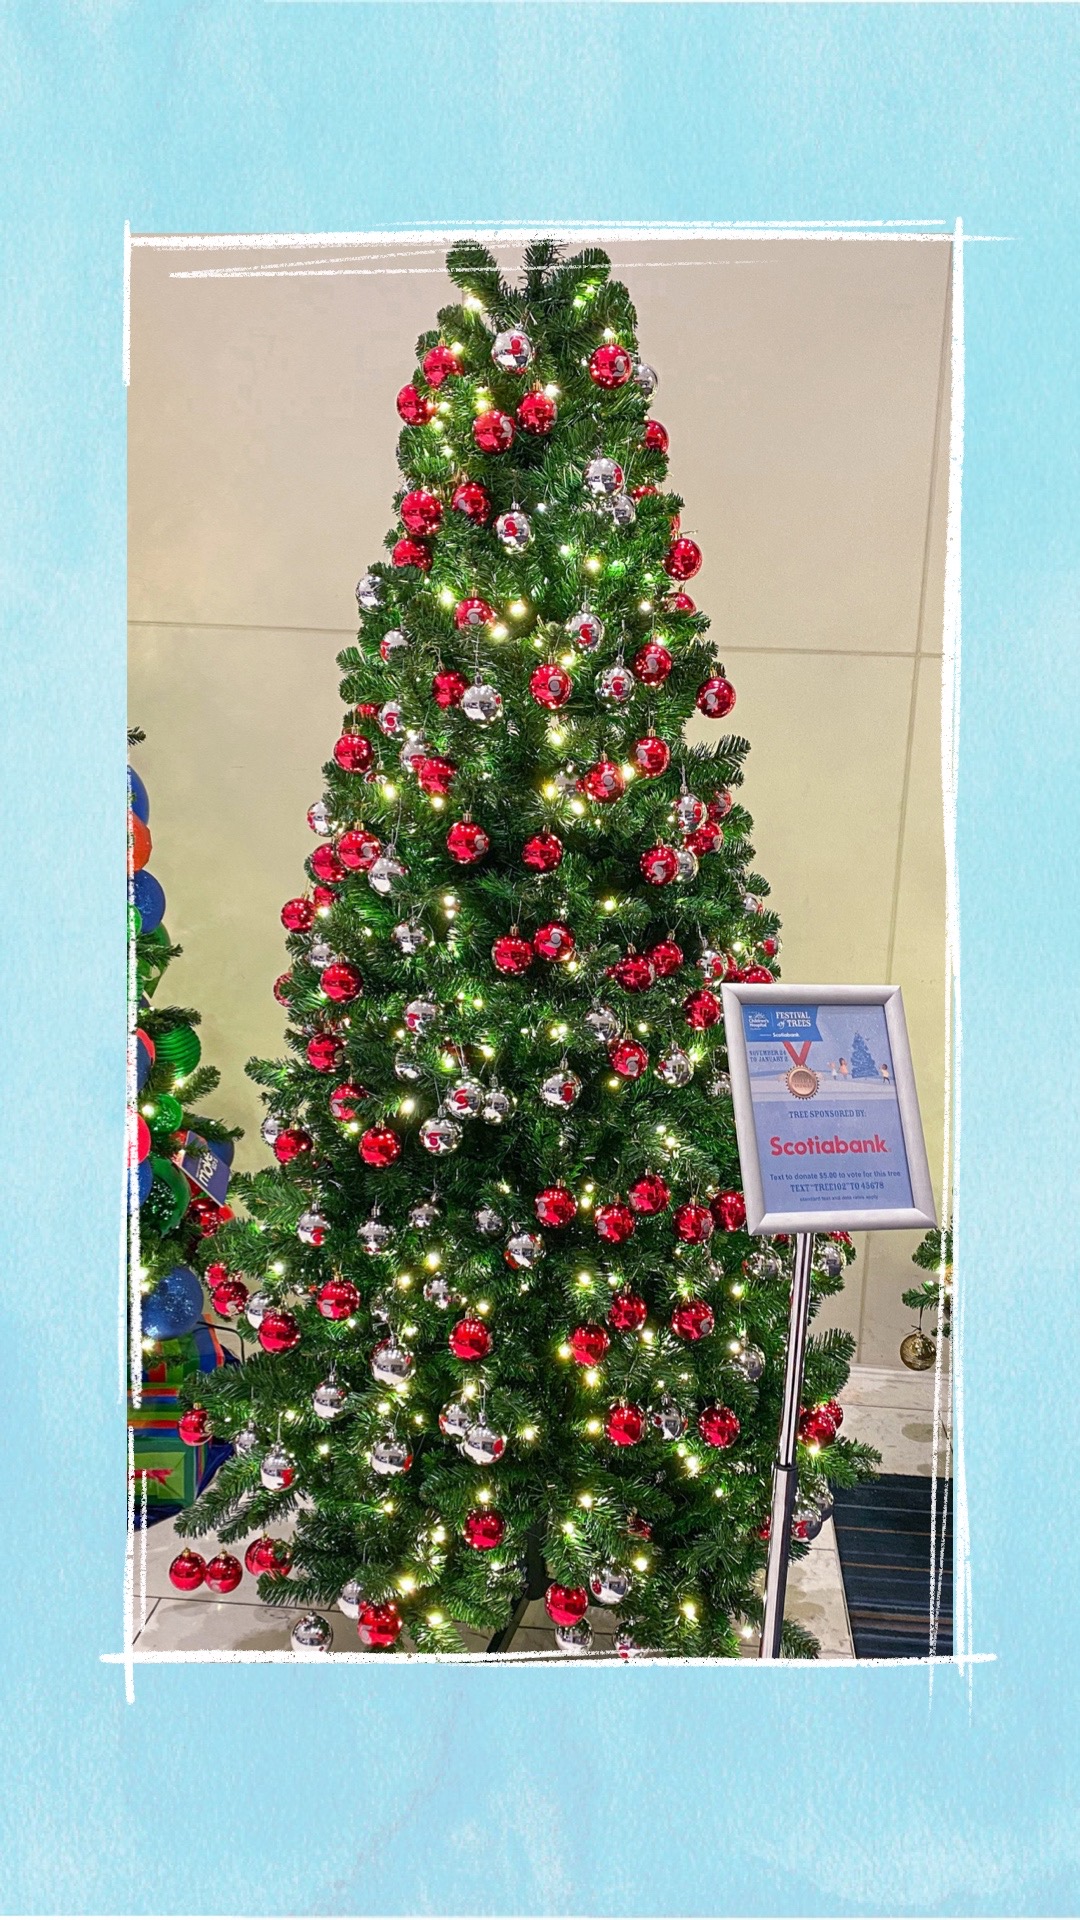 A holiday tree decorated with red and silver ornaments for the BCCHF Festival of Trees